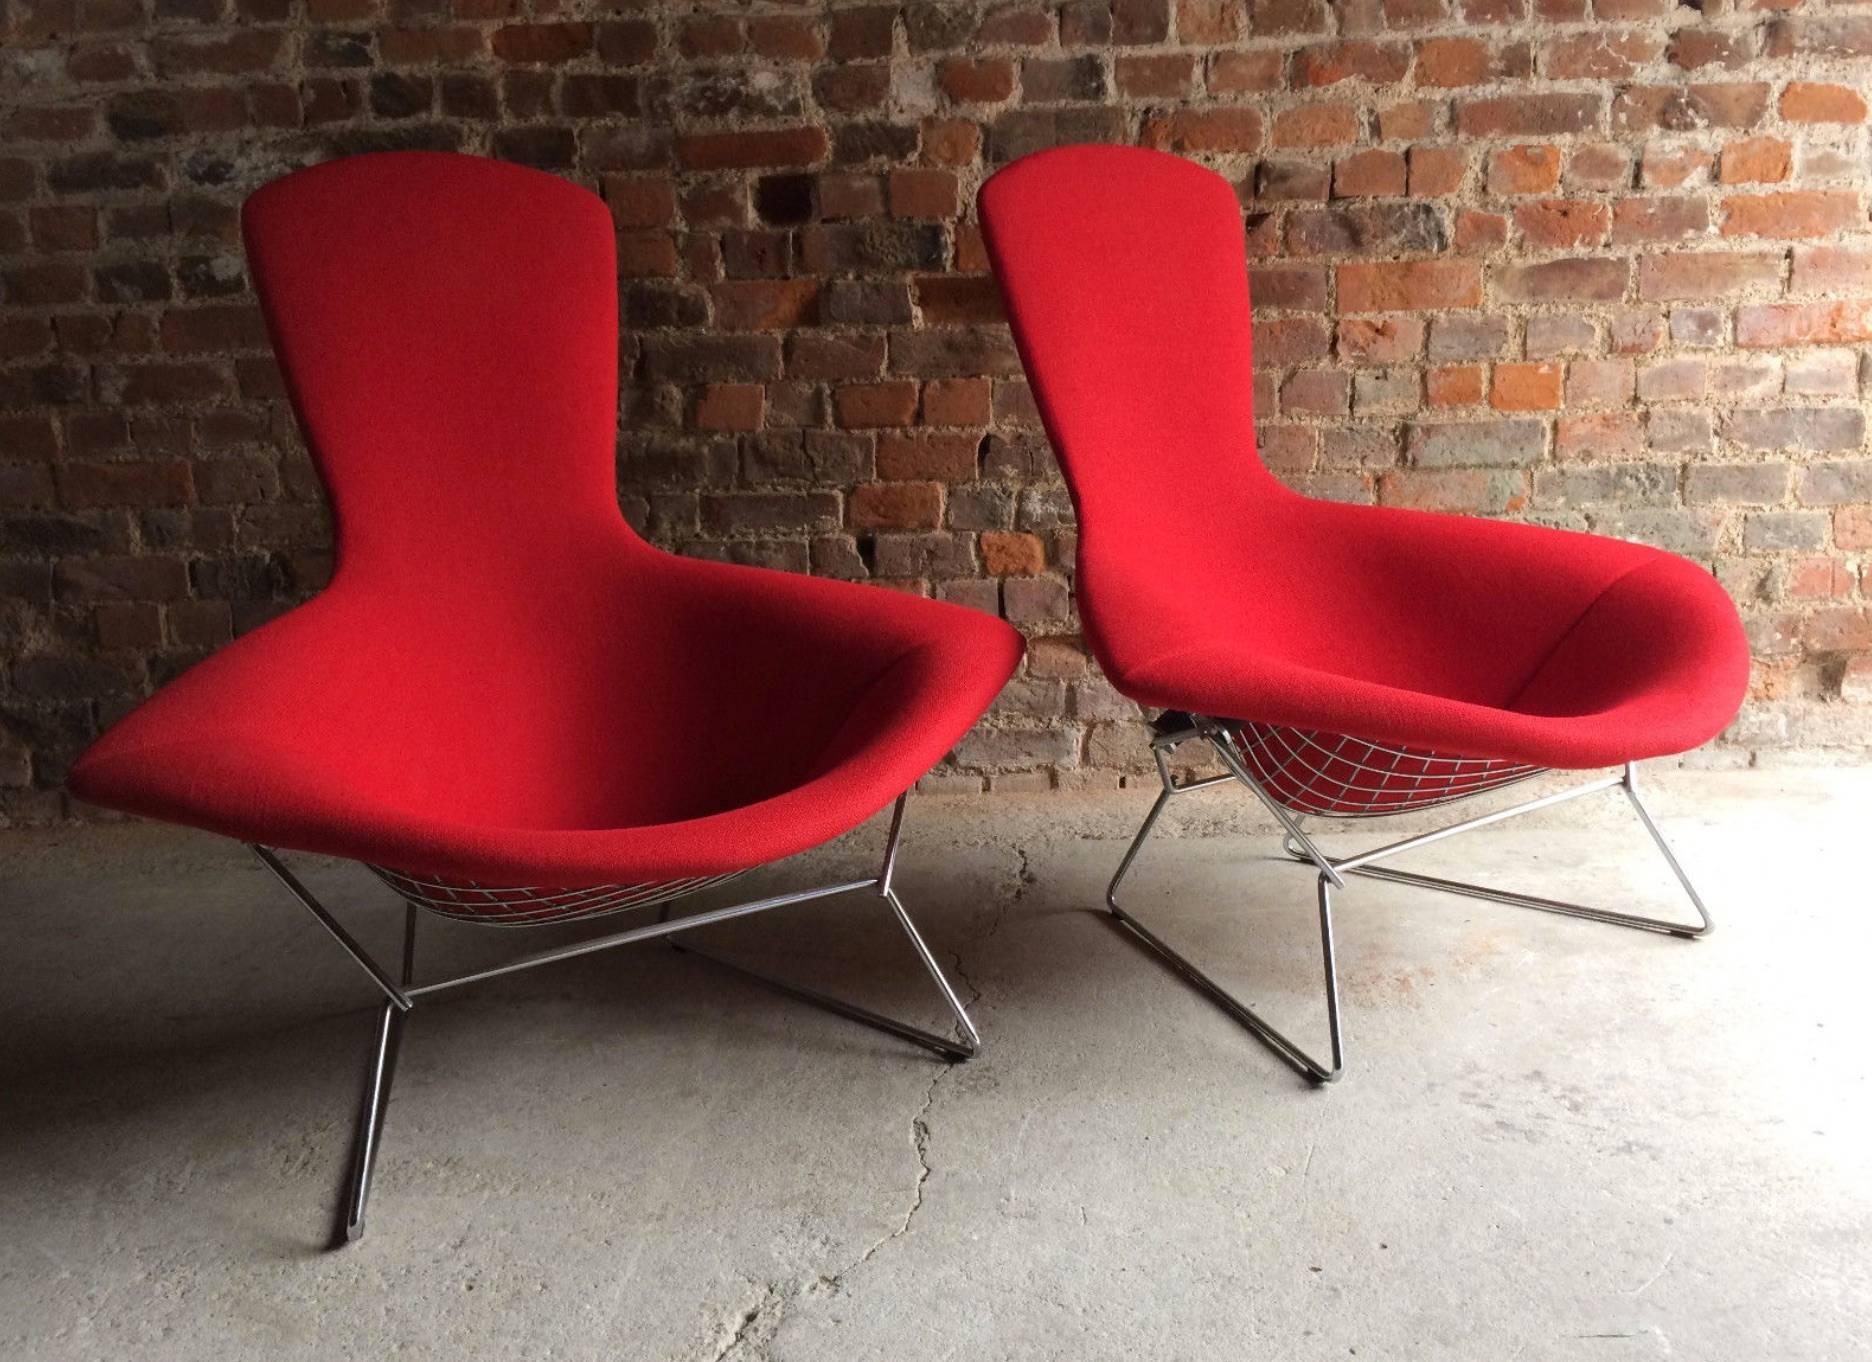 Chrome Pair of Harry Bertoia Bird Chairs in Red for Knoll International